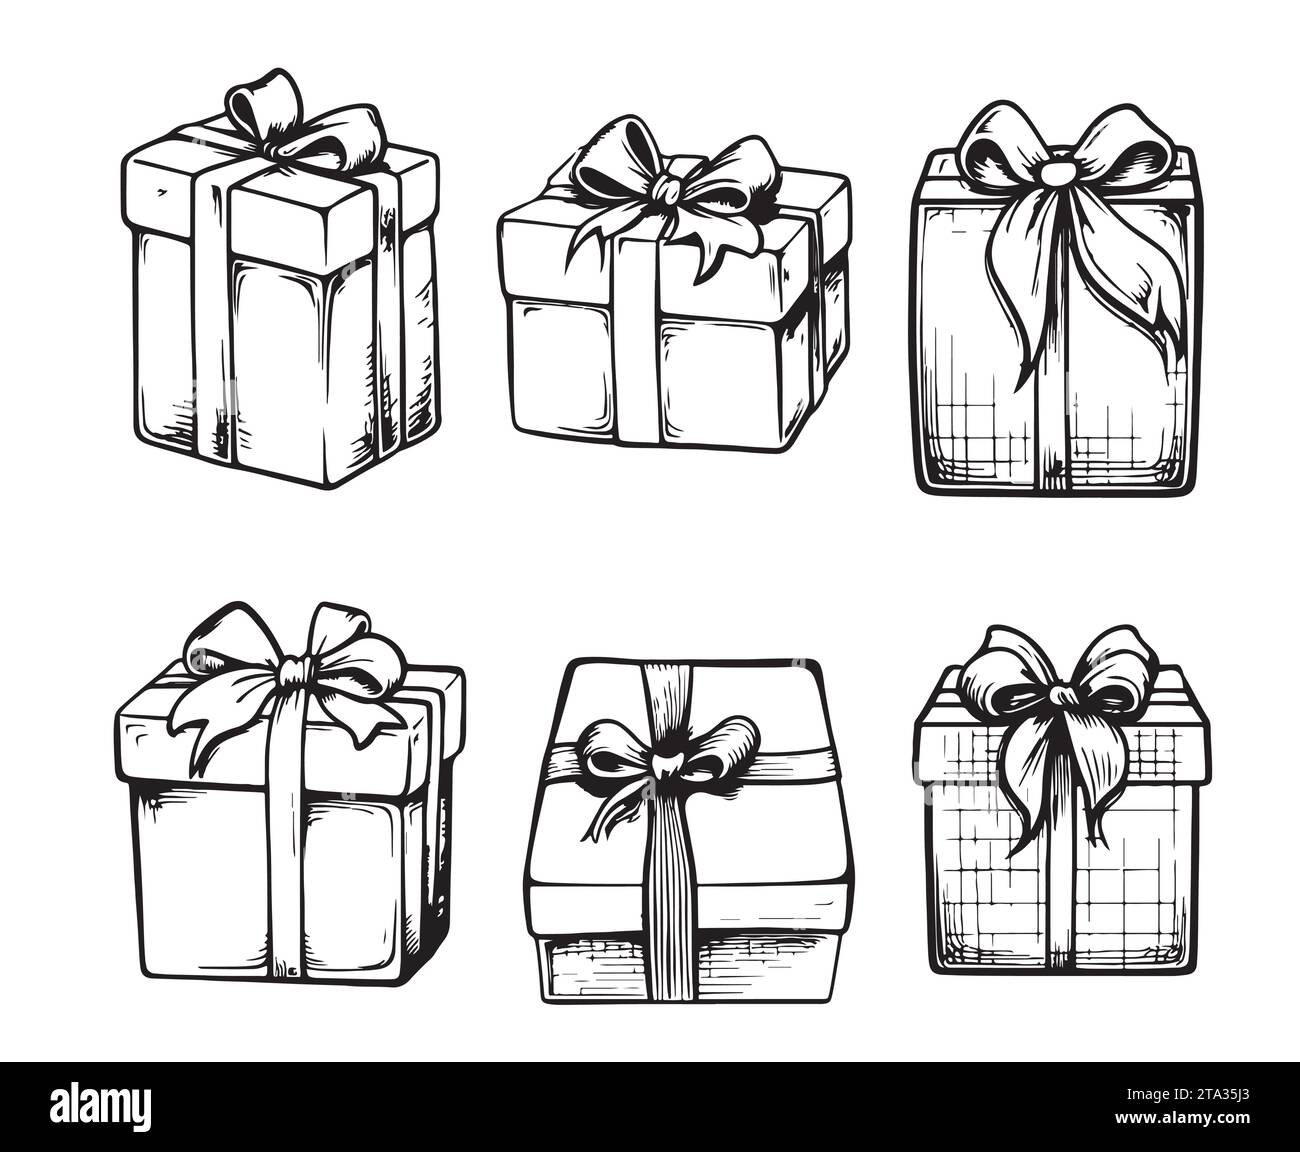 https://c8.alamy.com/comp/2TA35J3/art-line-drawing-of-different-gift-boxes-with-ribbon-bow-set-of-presents-in-black-one-line-holiday-doodle-icons-for-birthday-new-year-christmas-wedding-celebration-concept-in-minimalism-design-2TA35J3.jpg